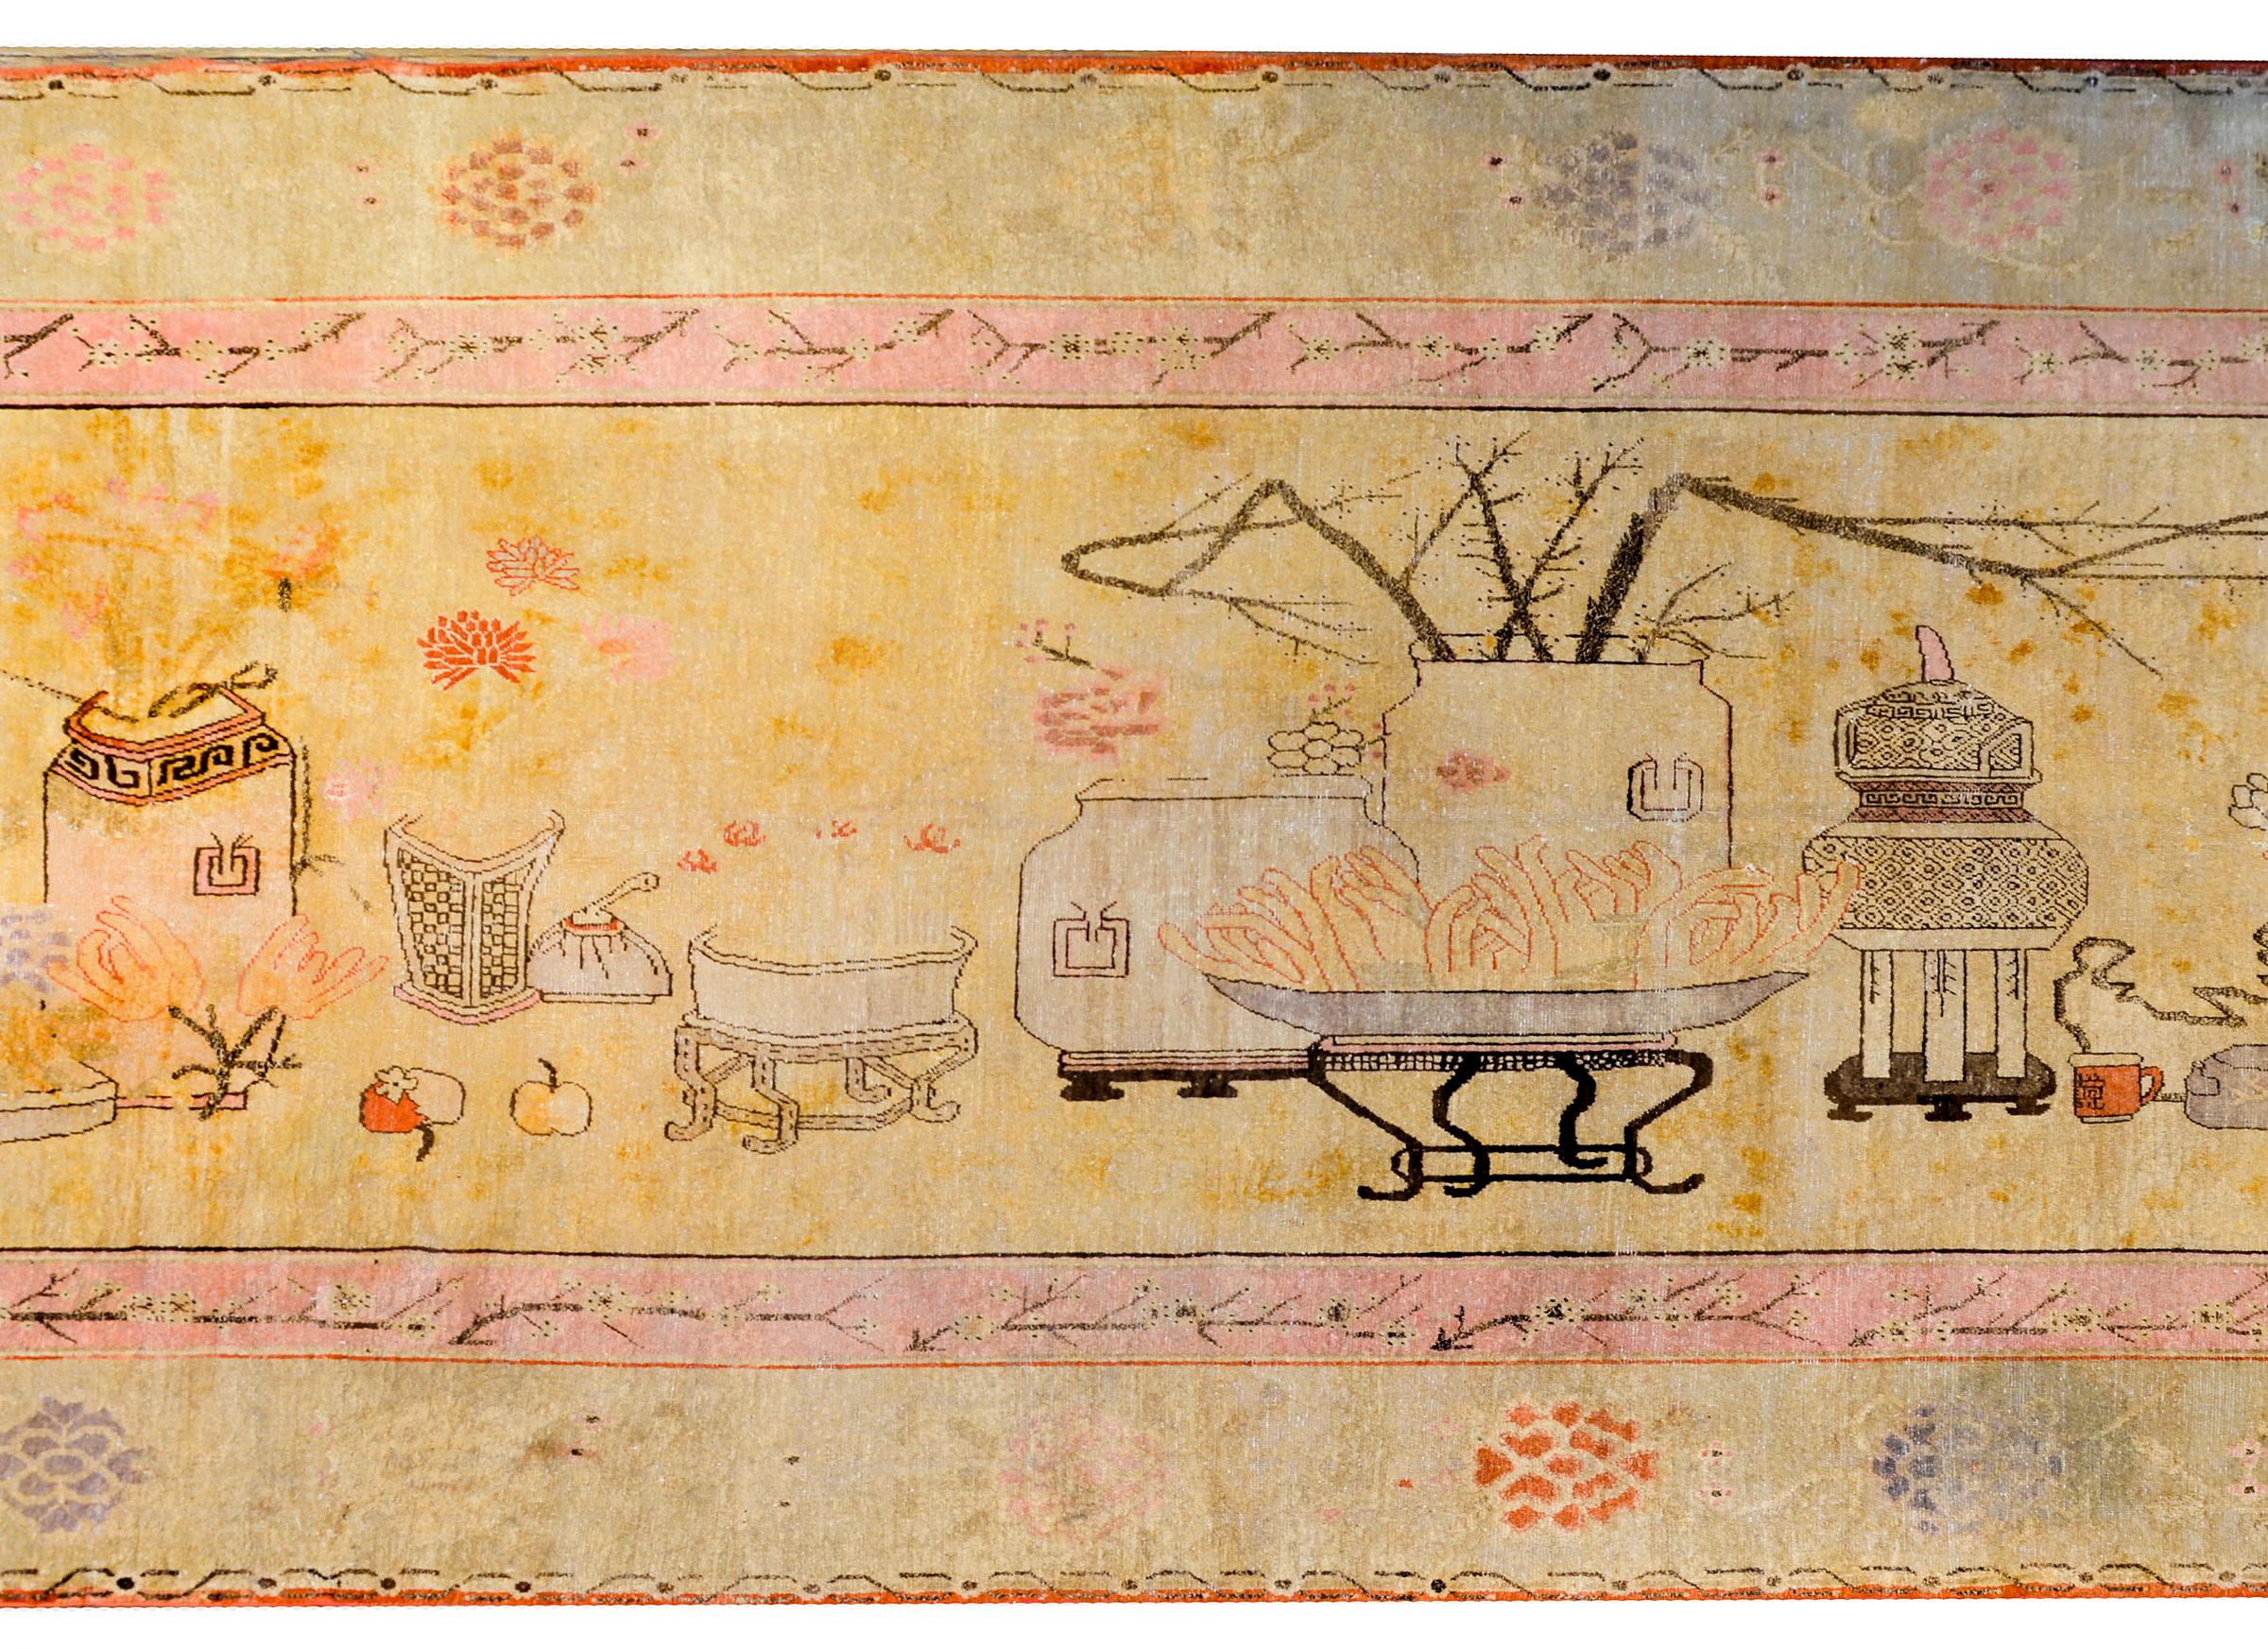 An unusual early 20th century Central Asian pictorial Khotan rug with a still-life image depicting myriad scholar's objects including potted peonies, chrysanthemum, and cherry blossoms, incense burners, Buddha's fingers, peaches, and scholar's